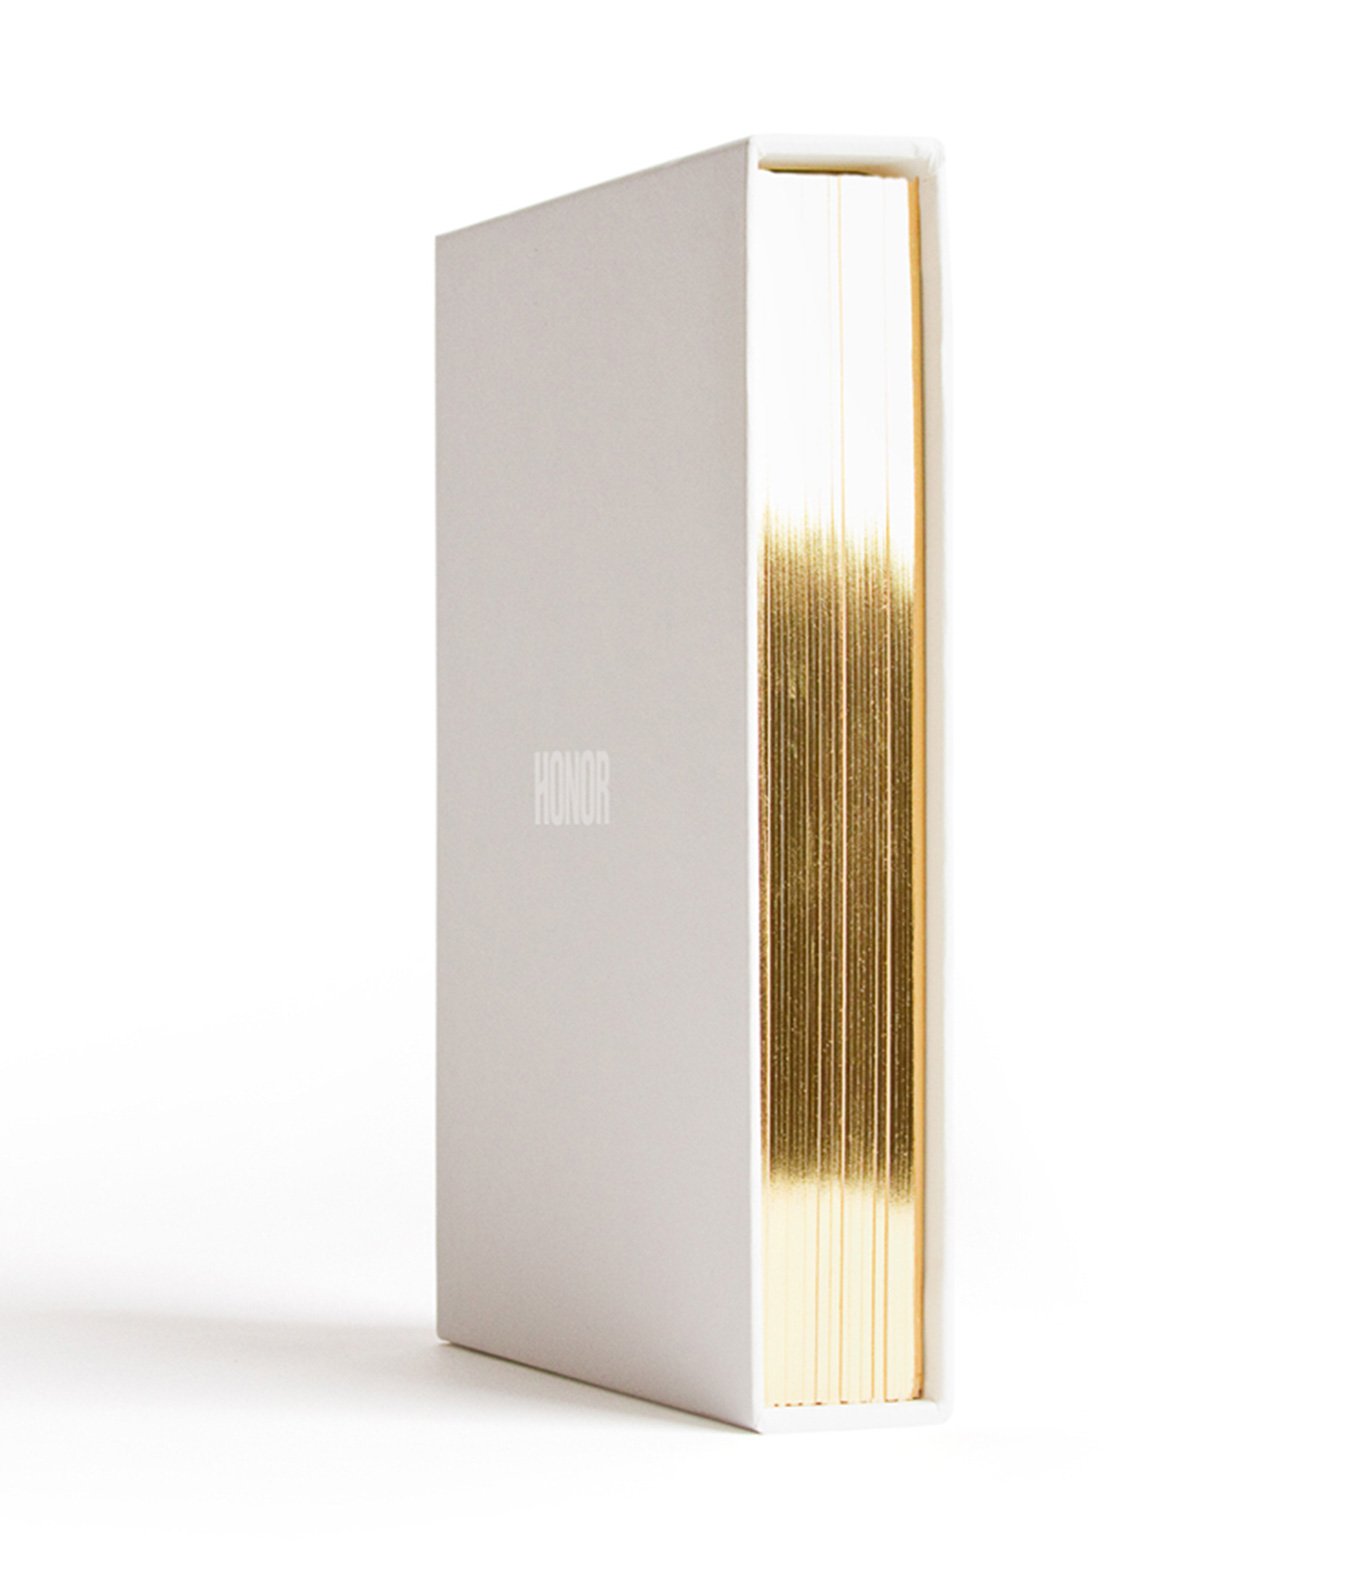 Honor Fashion Week 2010 book with gold foil edges and embossed logo, design by RoAndCo